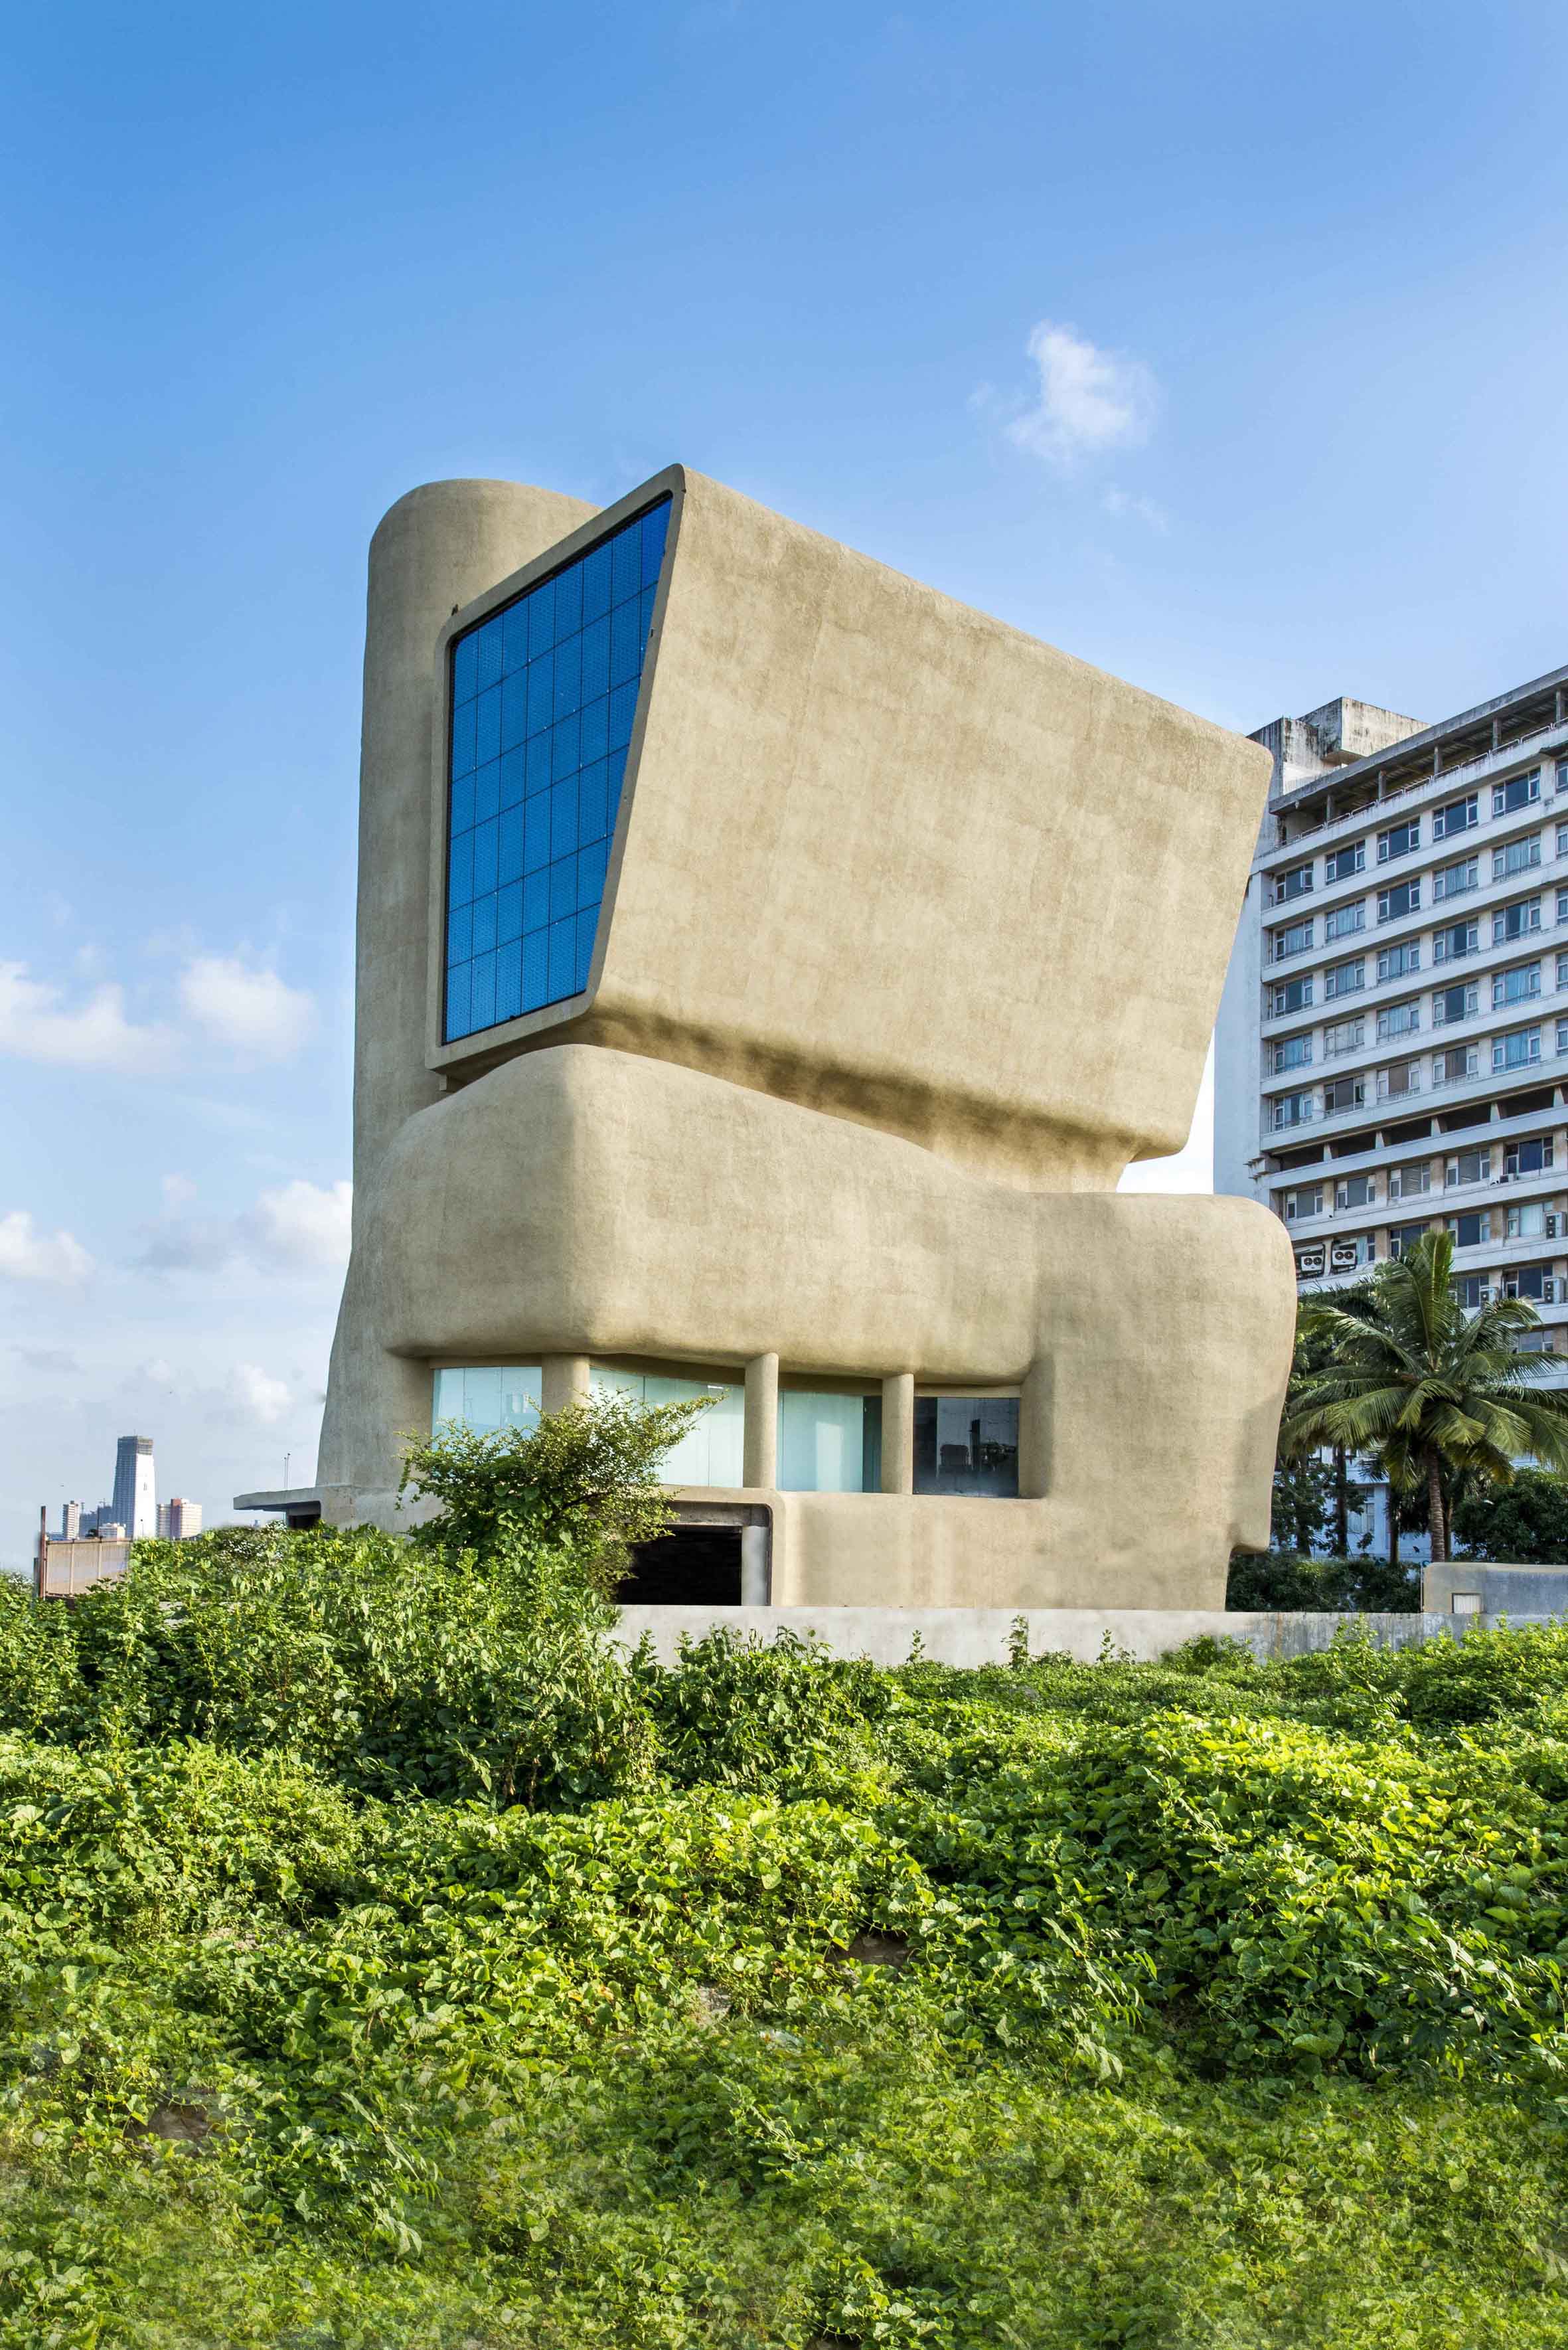 Bombay Arts Society is a mixed-use building containing an office and an art gallery